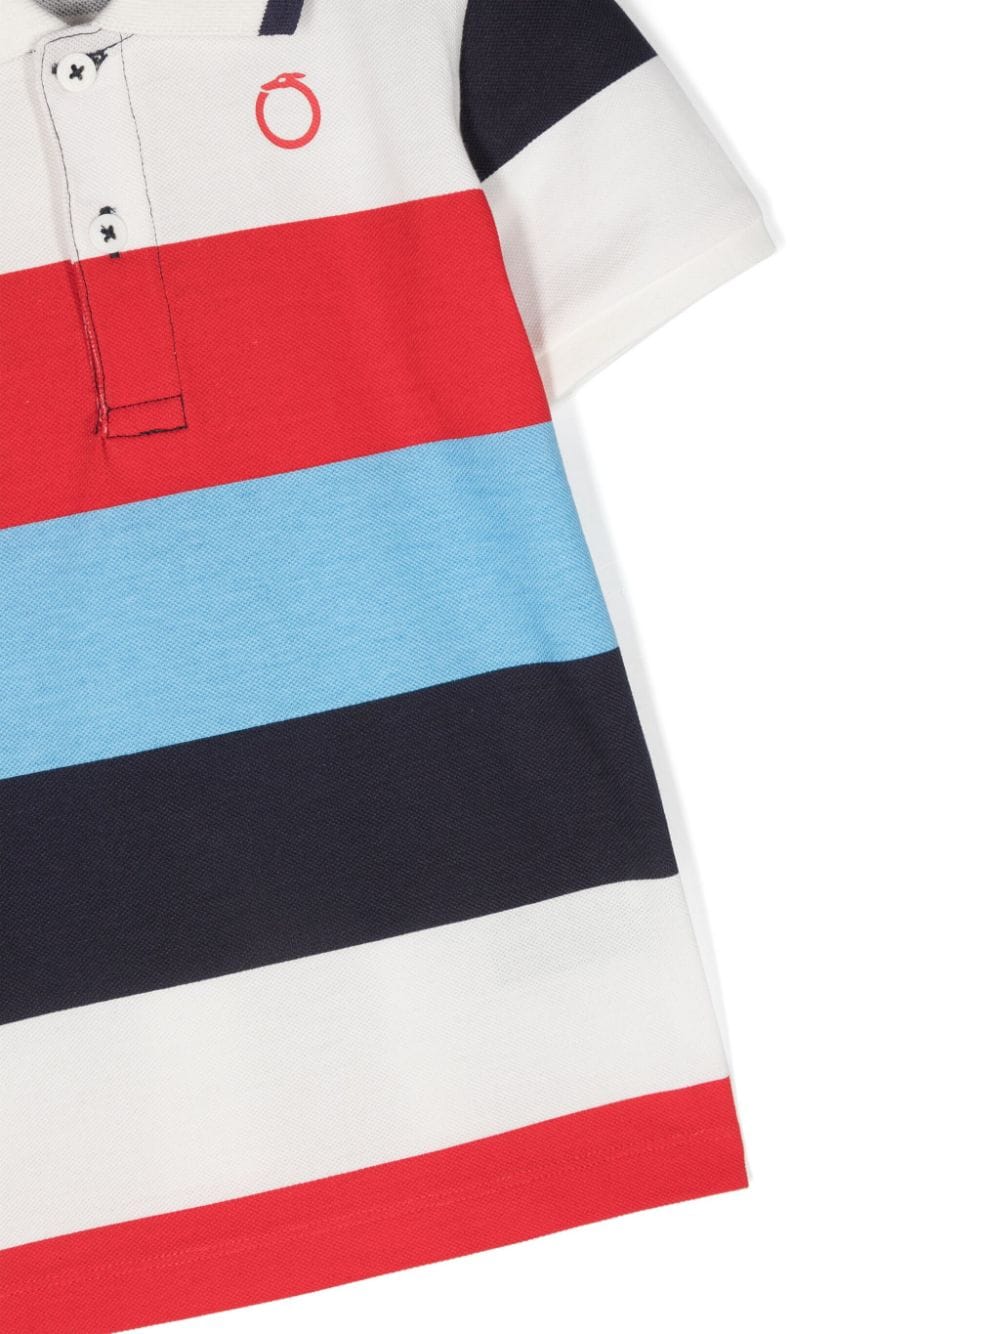 Blue, red and white polo shirt for boys with logo